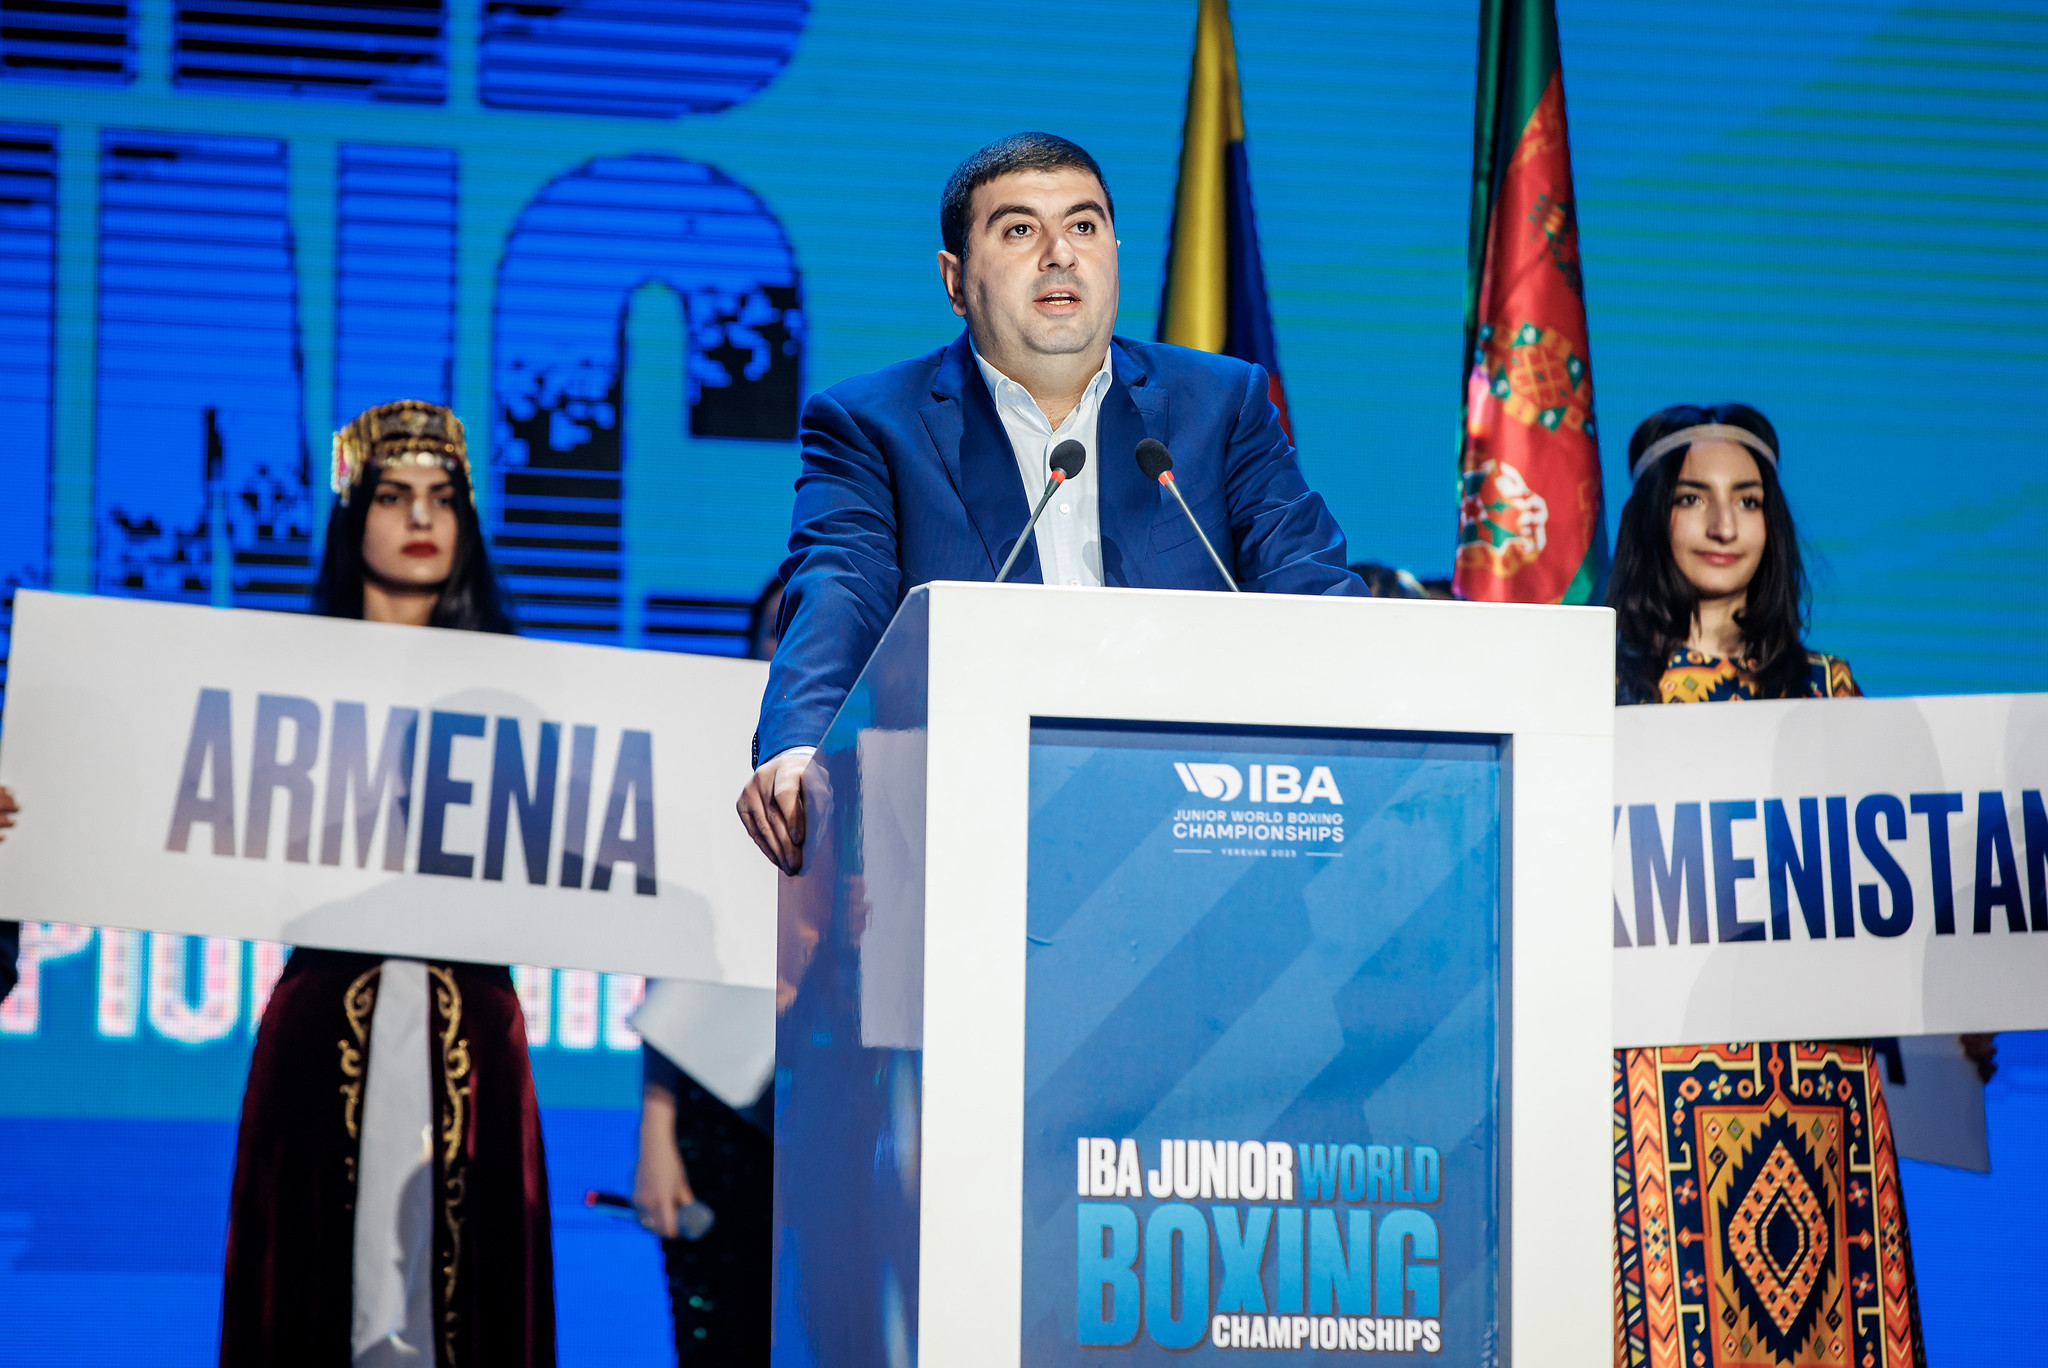 "IBA management has done a lot for boxing" believes BFA president Hovhannes Hovsepyan